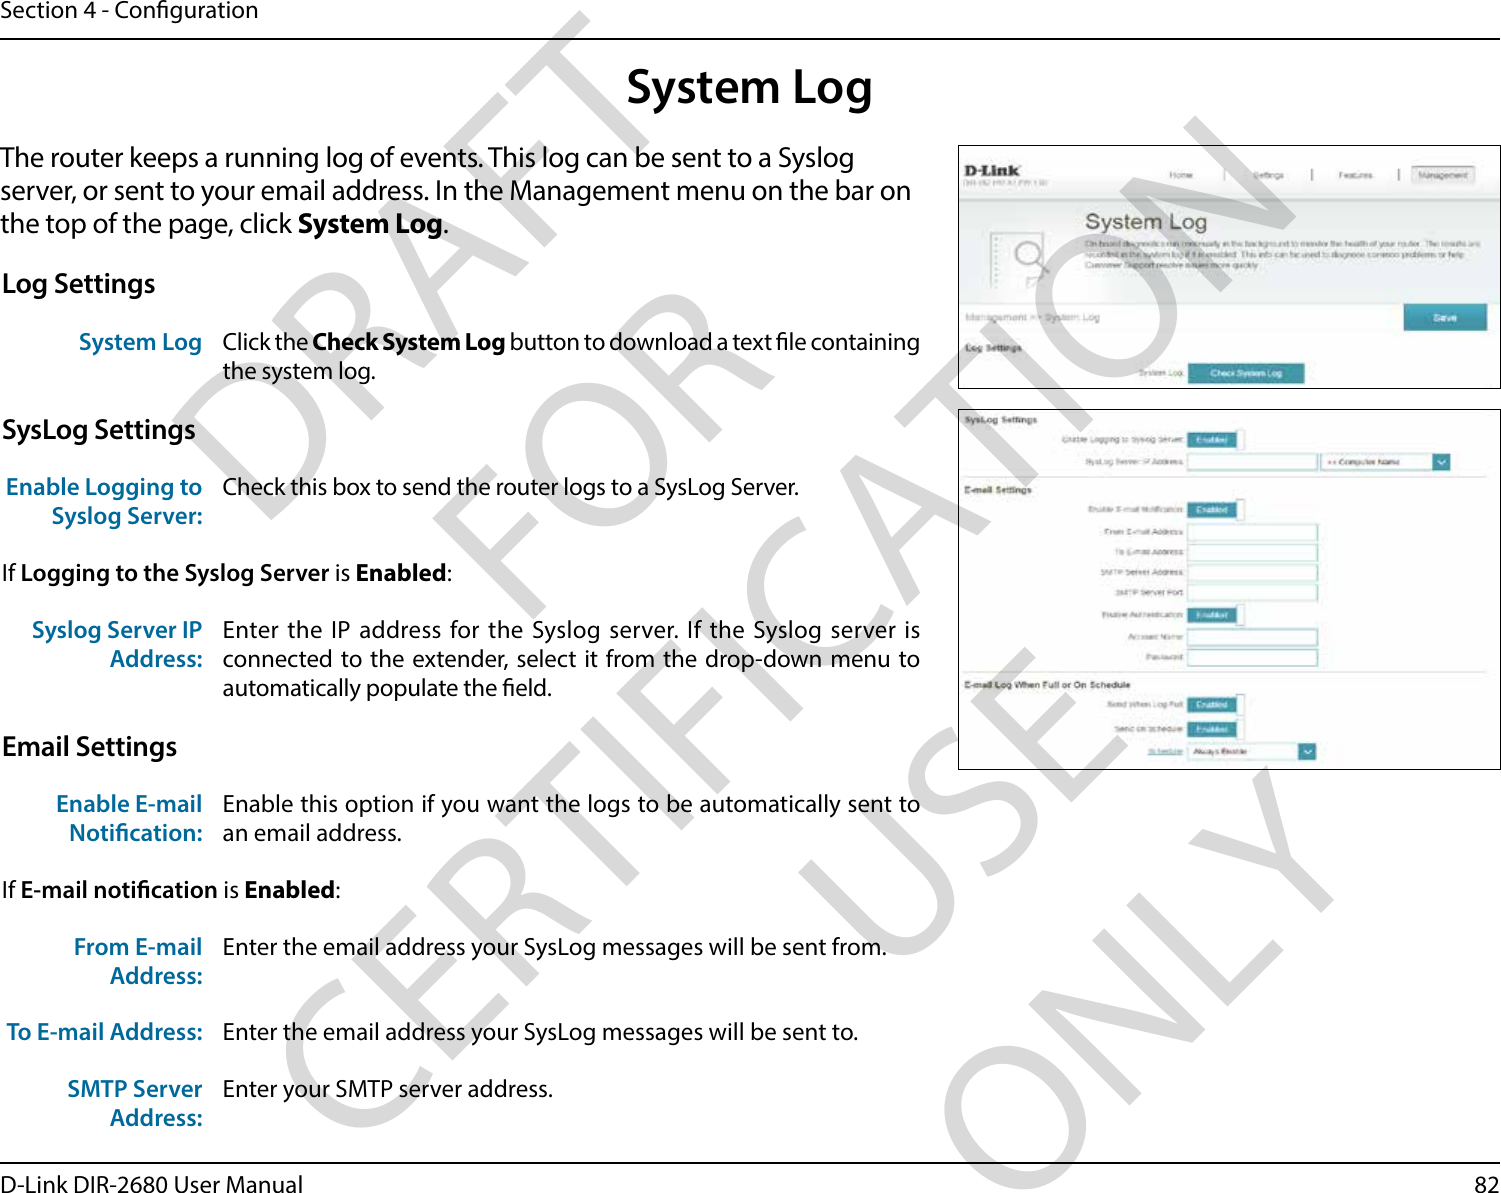 82D-Link DIR-2680 User ManualSection 4 - CongurationSystem LogThe router keeps a running log of events. This log can be sent to a Syslog server, or sent to your email address. In the Management menu on the bar on the top of the page, click System Log. Log SettingsSystem Log Click the Check System Log button to download a text le containing the system log.SysLog SettingsEnable Logging to Syslog Server:Check this box to send the router logs to a SysLog Server. If Logging to the Syslog Server is Enabled:Syslog Server IP Address:Enter the IP address for the Syslog server. If the Syslog server is connected to the extender, select it from the drop-down menu to automatically populate the eld. Email SettingsEnable E-mail Notication:Enable this option if you want the logs to be automatically sent to an email address.If E-mail notication is Enabled:From E-mail Address:Enter the email address your SysLog messages will be sent from.To E-mail Address: Enter the email address your SysLog messages will be sent to.SMTP Server Address:Enter your SMTP server address.DRAFT FOR CERTIFICATION USE ONLY